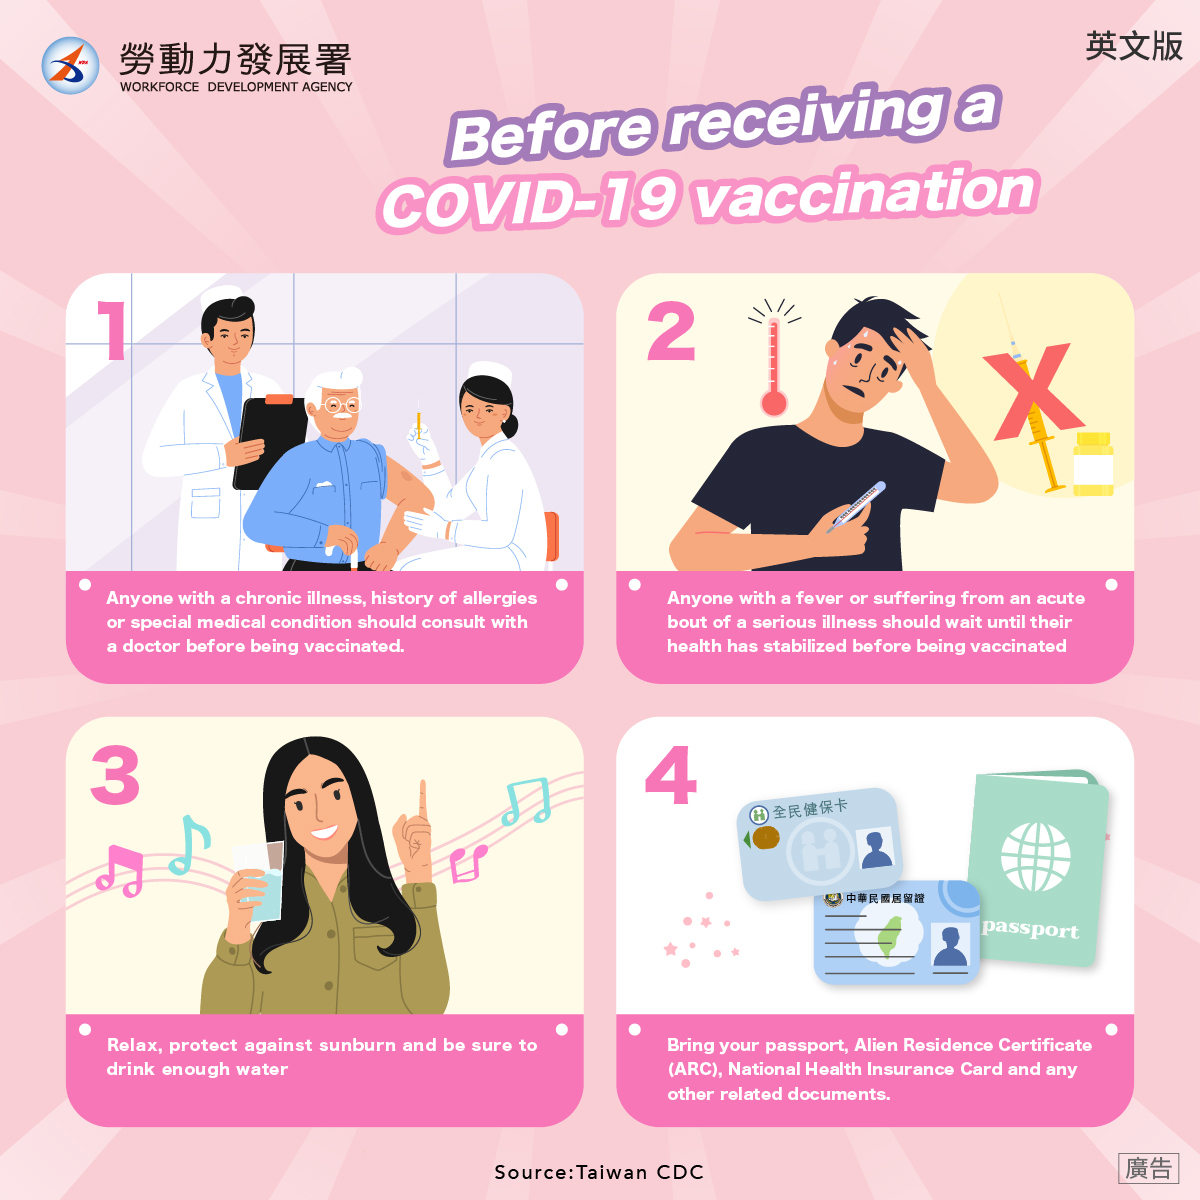 Before your COVID-19 vaccination